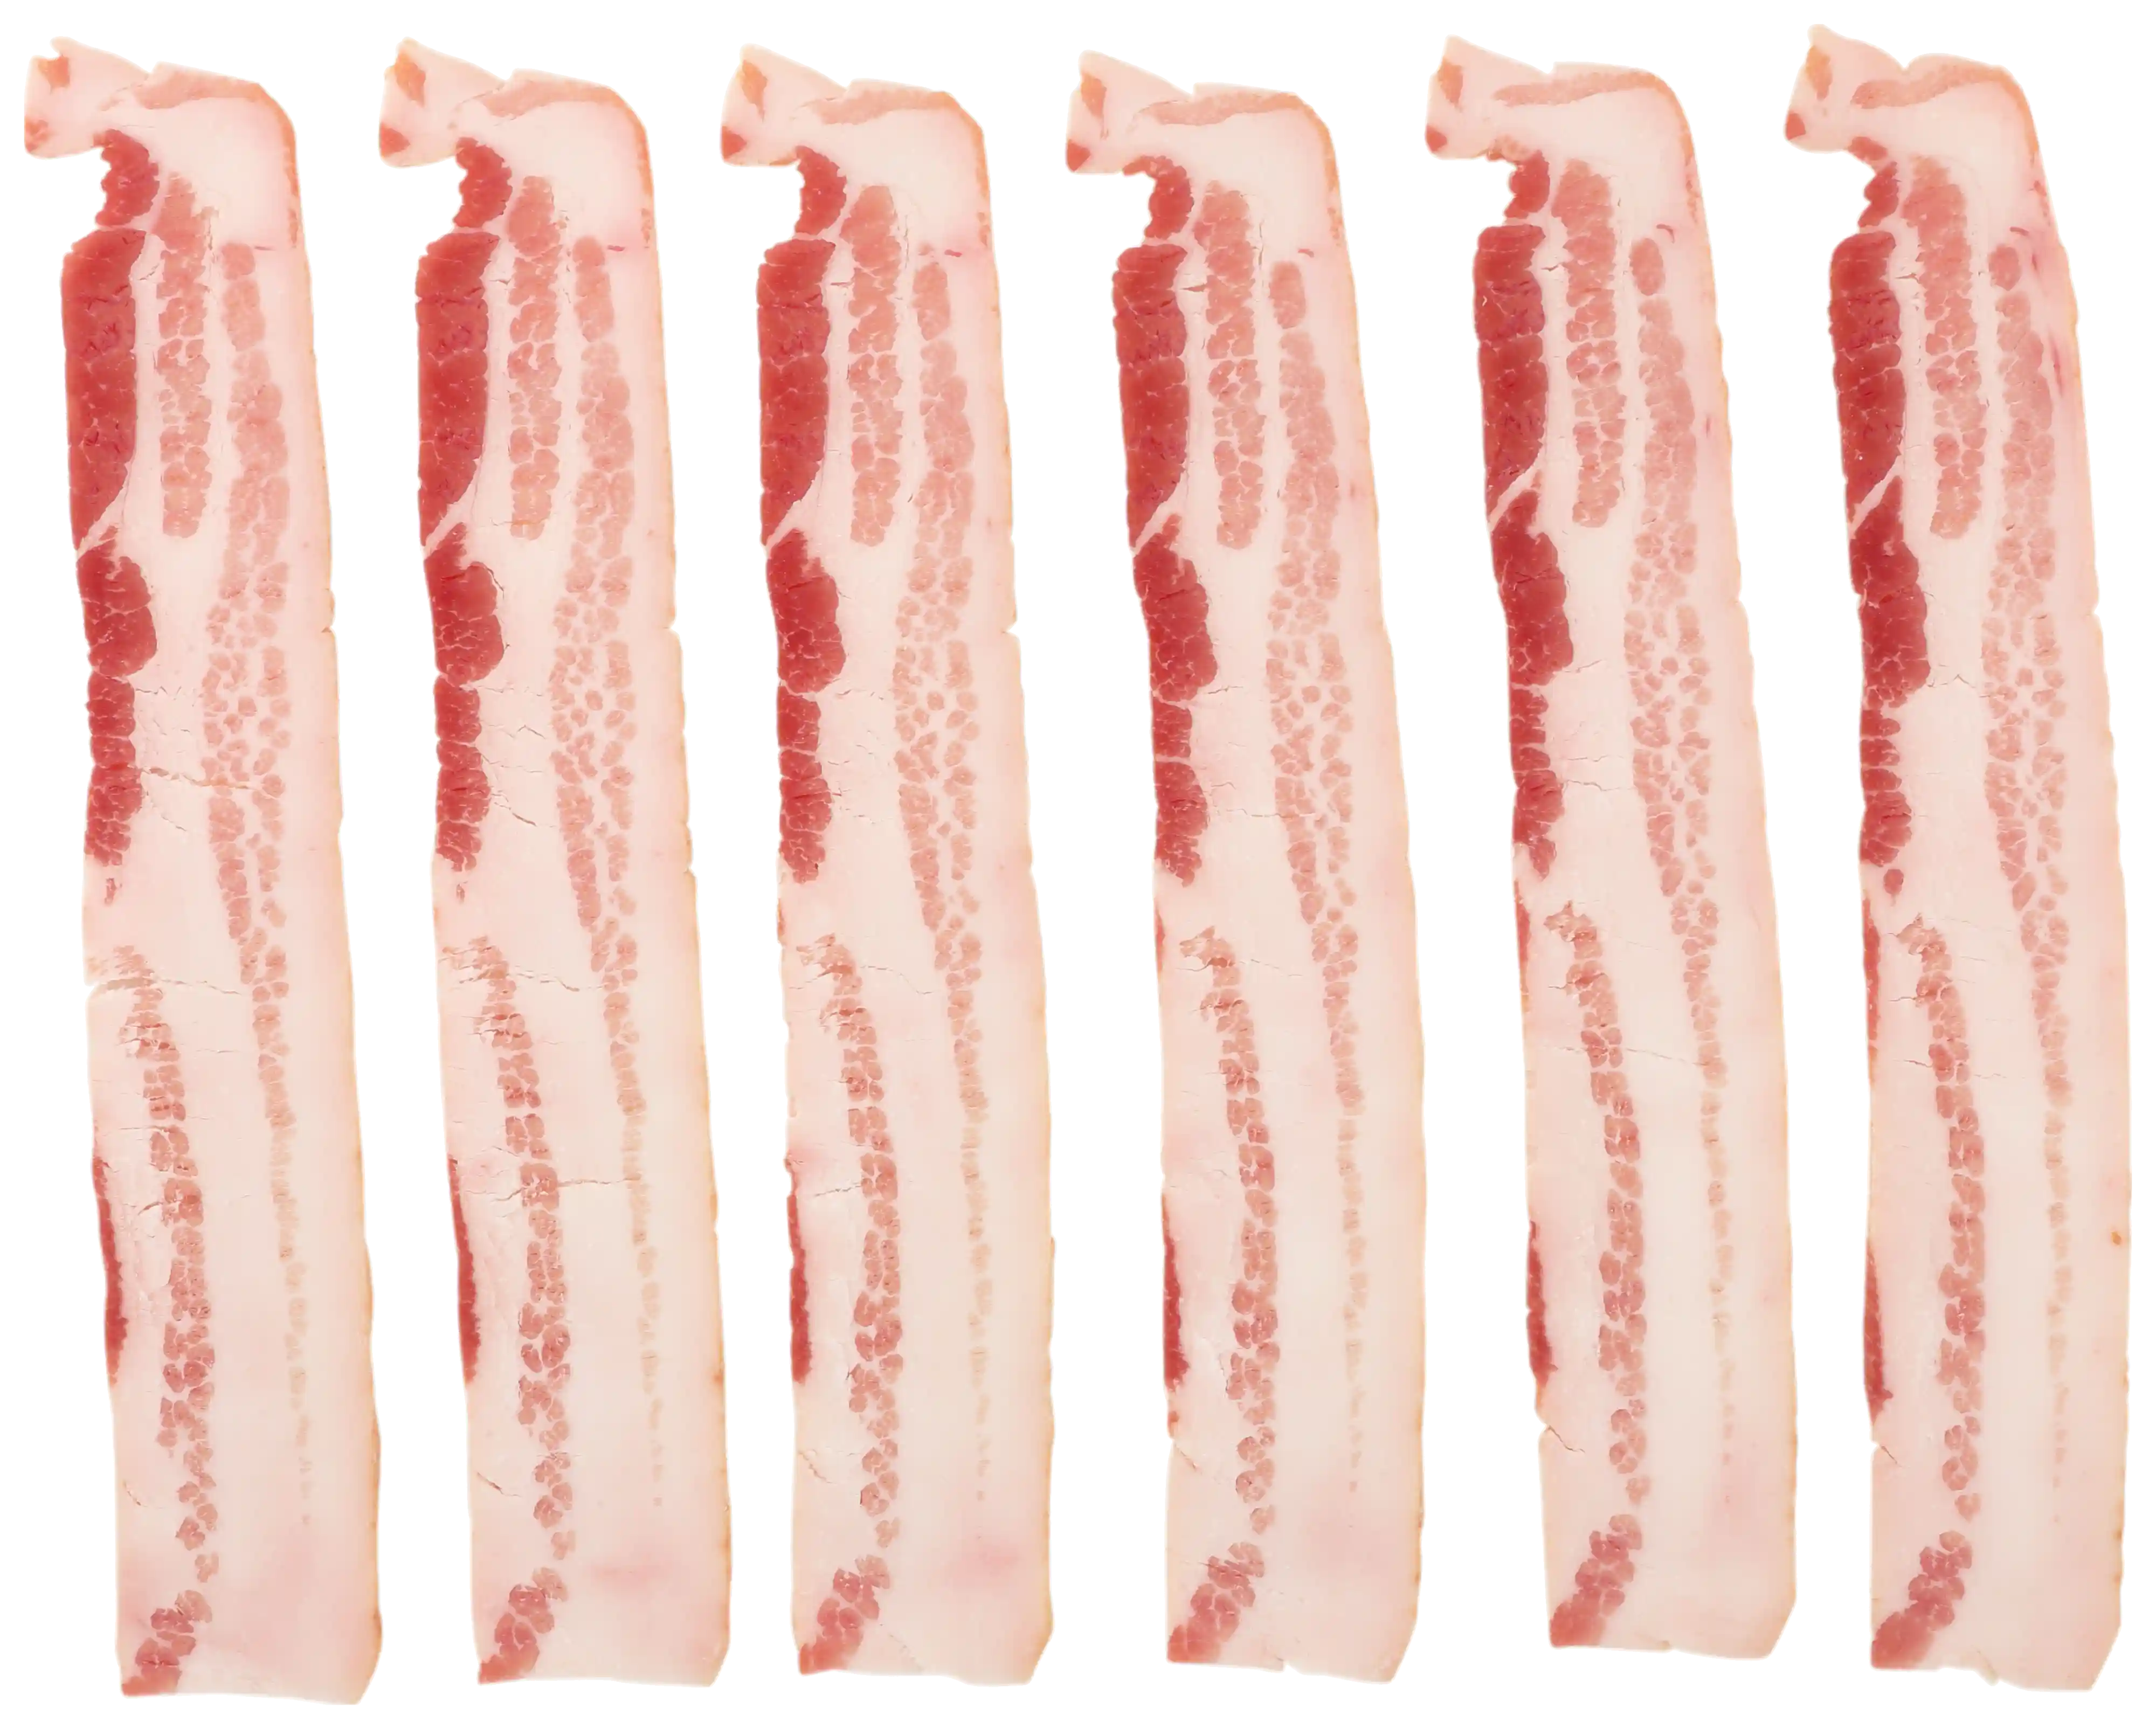 Wright® Brand Naturally Hickory Smoked Thick Sliced Bacon, Bulk, 15 Lbs, 10-14 Slices per Pound, Gas Flushed_image_11